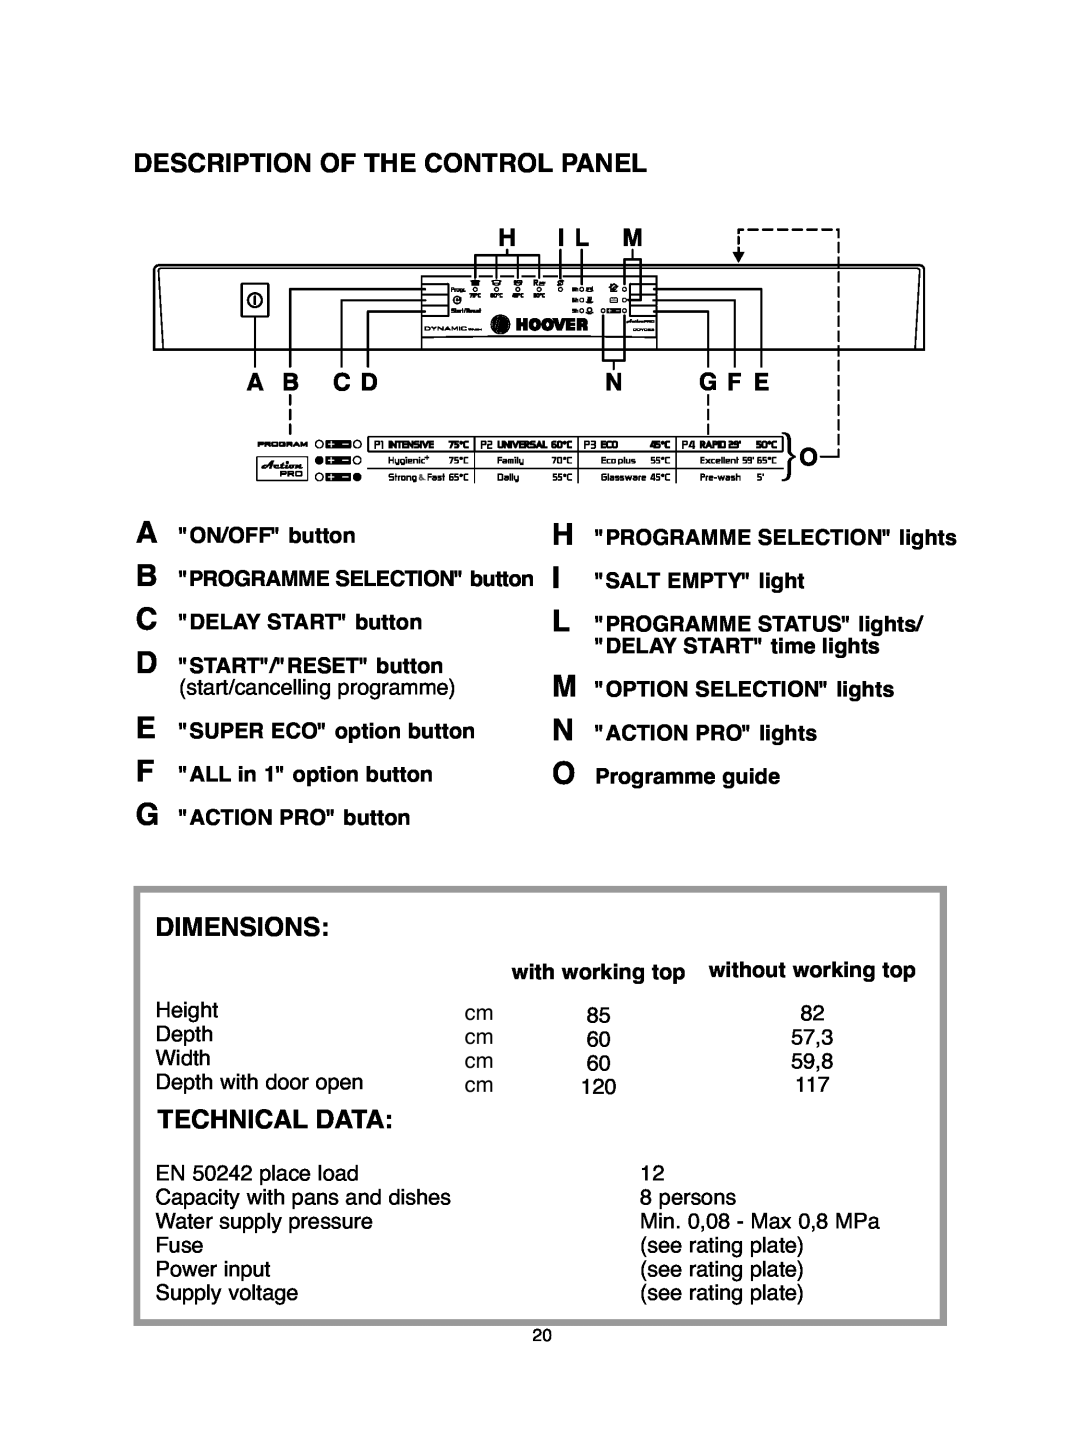 Hoover DDY 062 manual Description Of The Control Panel, Dimensions, Technical Data 